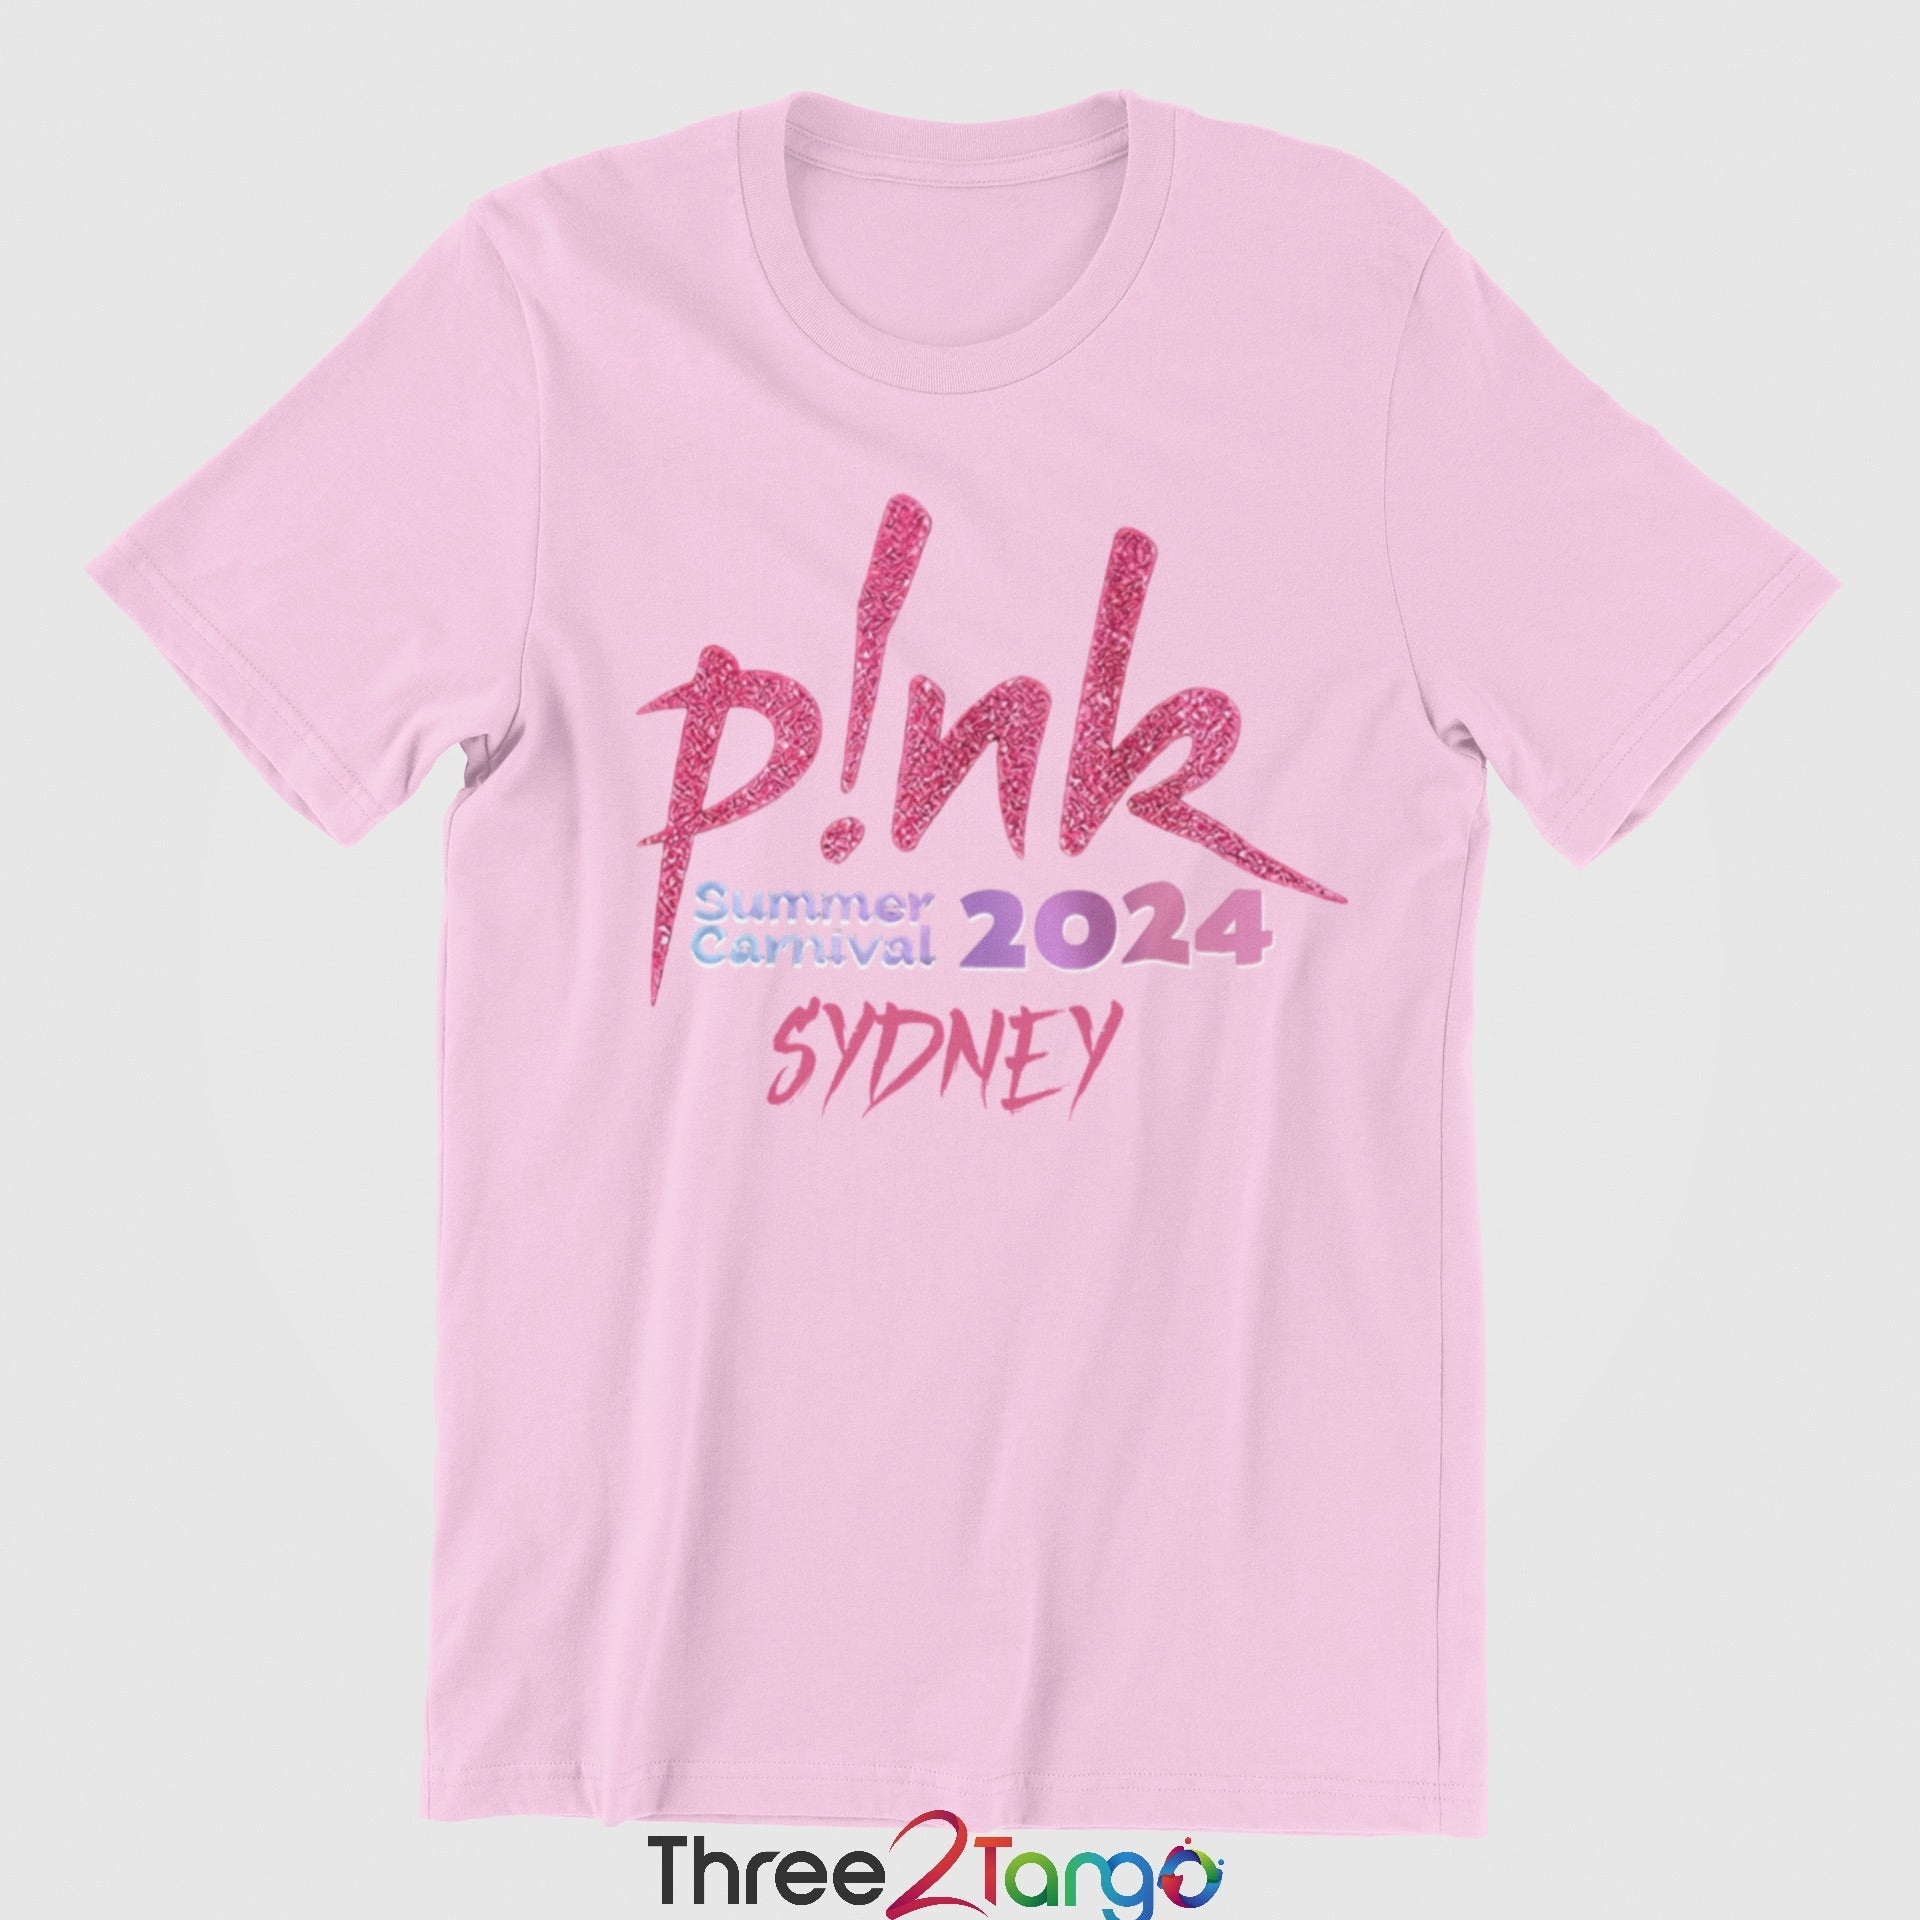 Pink Concert T-shirt - Summer Carnival 2024 Australia - Pink in the City - Three2Tango Tee's